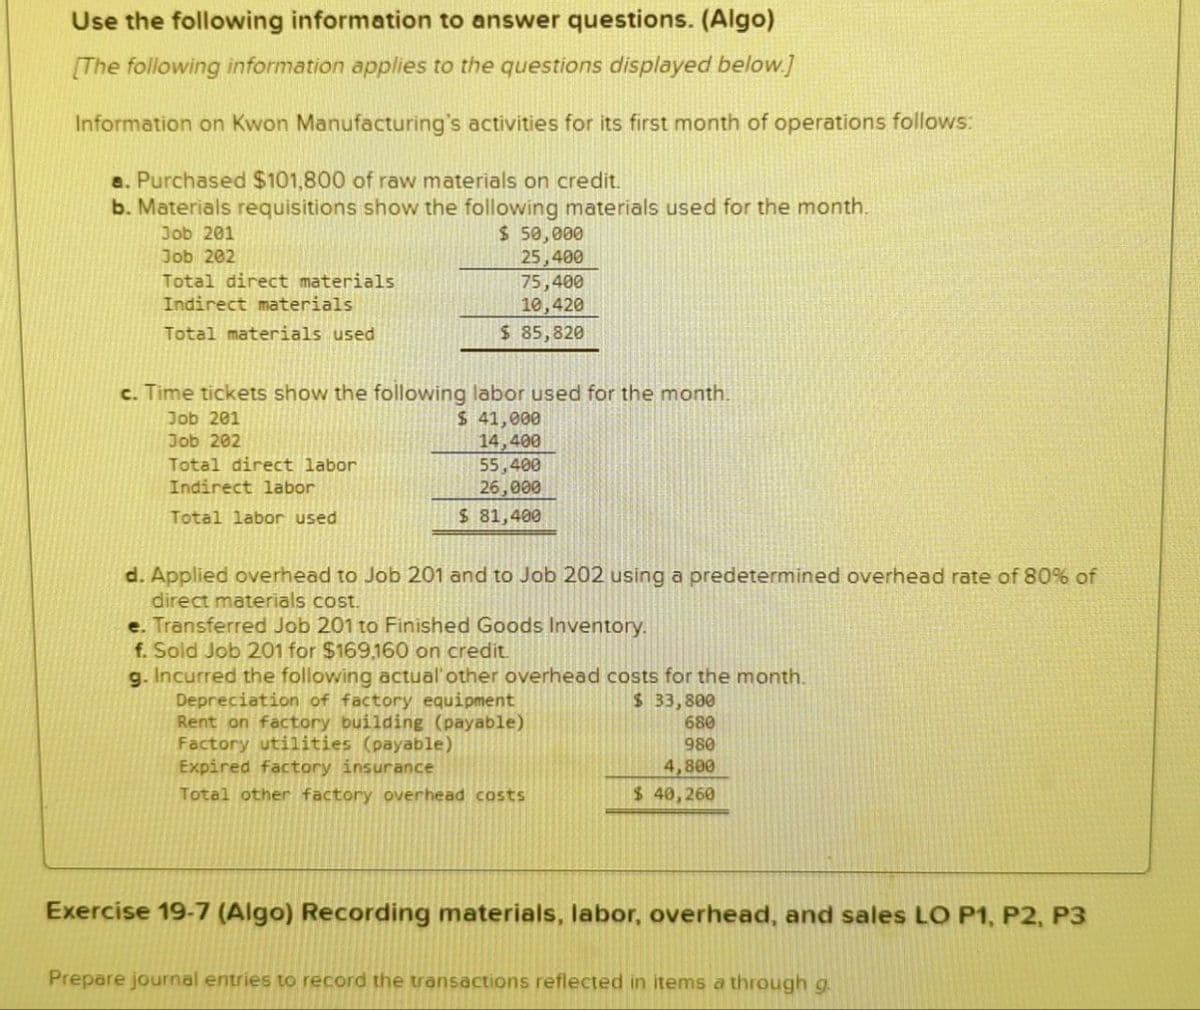 Use the following information to answer questions. (Algo)
[The following information applies to the questions displayed below.]
Information on Kwon Manufacturing's activities for its first month of operations follows:
a. Purchased $101,800 of raw materials on credit.
b. Materials requisitions show the following materials used for the month.
Job 201
Job 202
Total direct materials
Indirect materials
Total materials used
$ 50,000
25,400
75,400
10,420
$ 85,820
c. Time tickets show the following labor used for the month.
Job 201
$ 41,000
Job 202
14,400
Total direct labor
55,400
26,000
$ 81,400
Indirect labor
Total labor used
d. Applied overhead to Job 201 and to Job 202 using a predetermined overhead rate of 80% of
direct materials cost.
e. Transferred Job 201 to Finished Goods Inventory.
f. Sold Job 201 for $169,160 on credit.
g. Incurred the following actual' other overhead costs for the month.
Depreciation of factory equipment
Rent on factory building (payable)
Factory utilities (payable)
$ 33,800
680
Expired factory insurance
980
4,800
Total other factory overhead costs
$ 40,260
Exercise 19-7 (Algo) Recording materials, labor, overhead, and sales LO P1, P2, P3
Prepare journal entries to record the transactions reflected in items a through g.